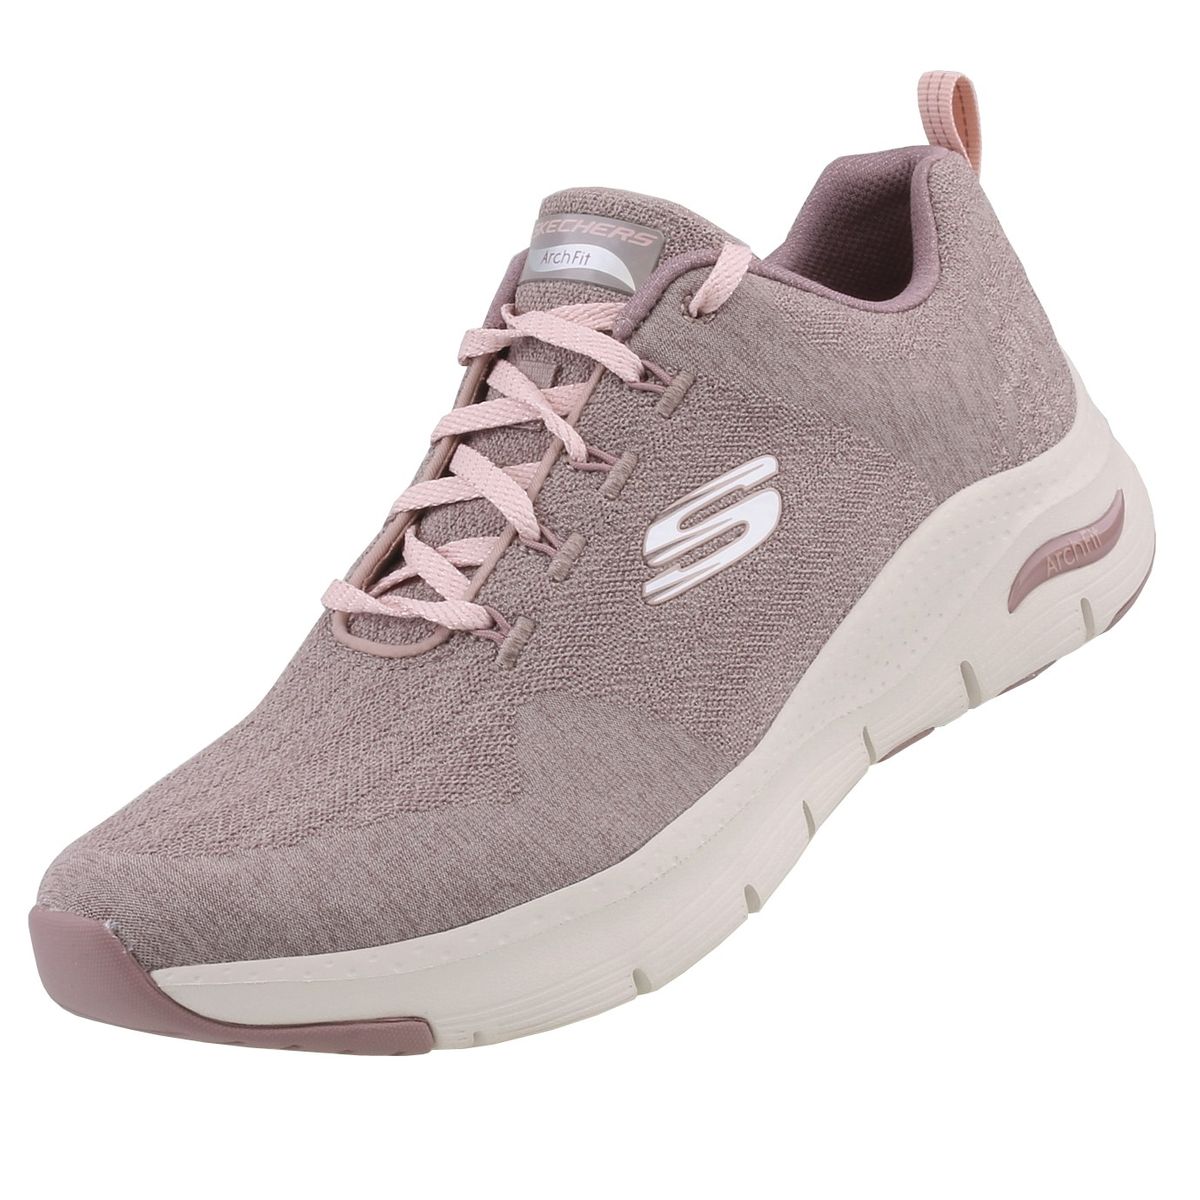 Skechers Arch Comfy - Wave - Taupe Dark Fit